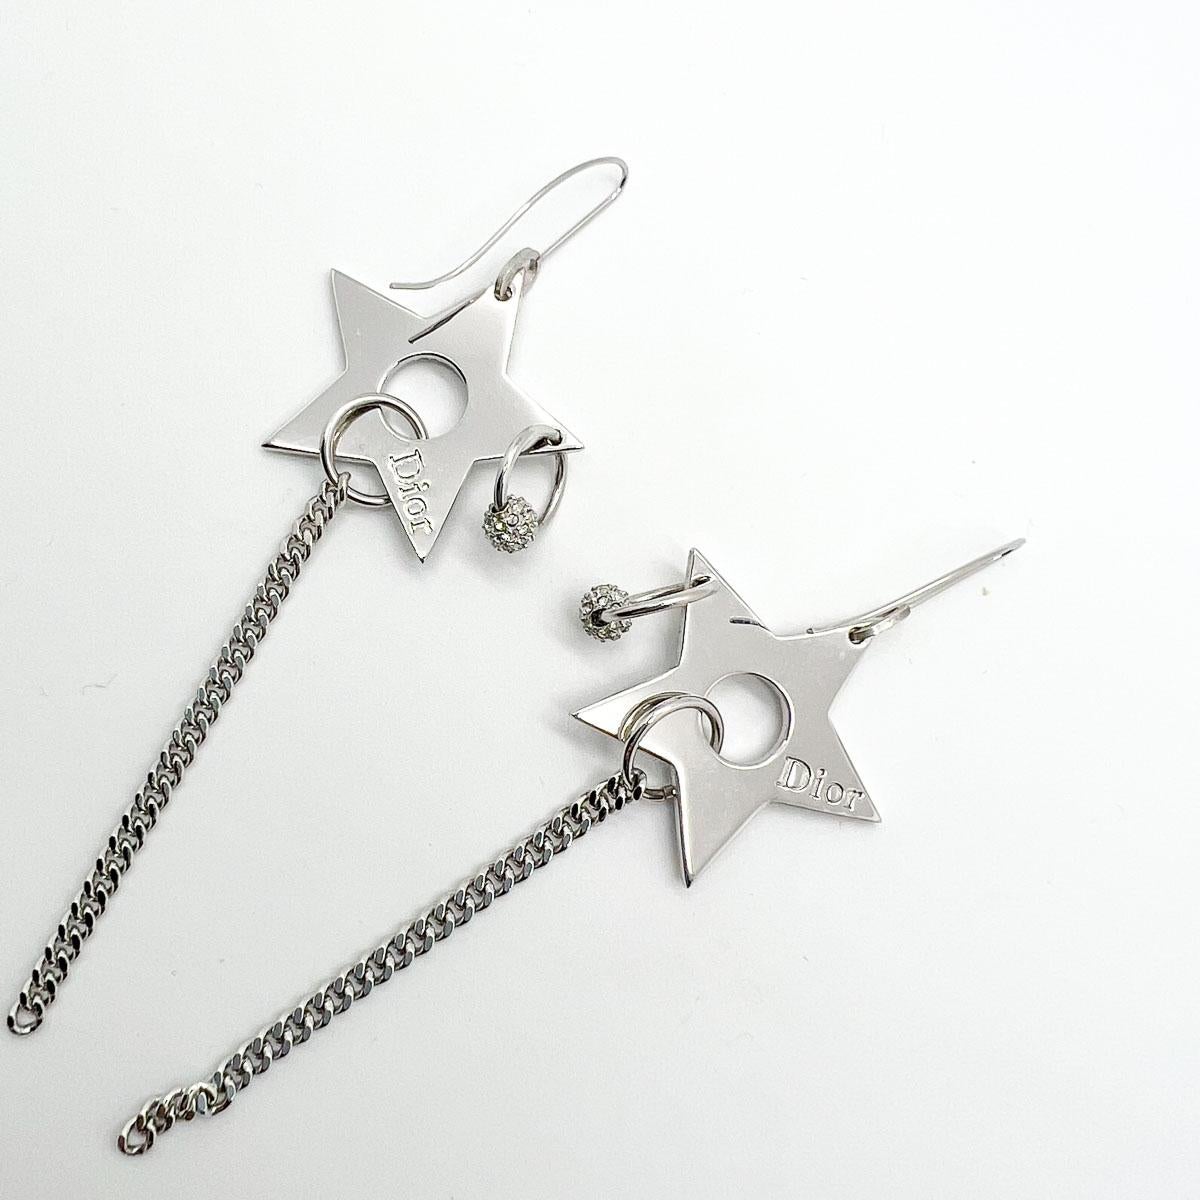 Vintage Christian Dior by Galliano Pierced Star Earrings 2000s In Good Condition For Sale In Wilmslow, GB